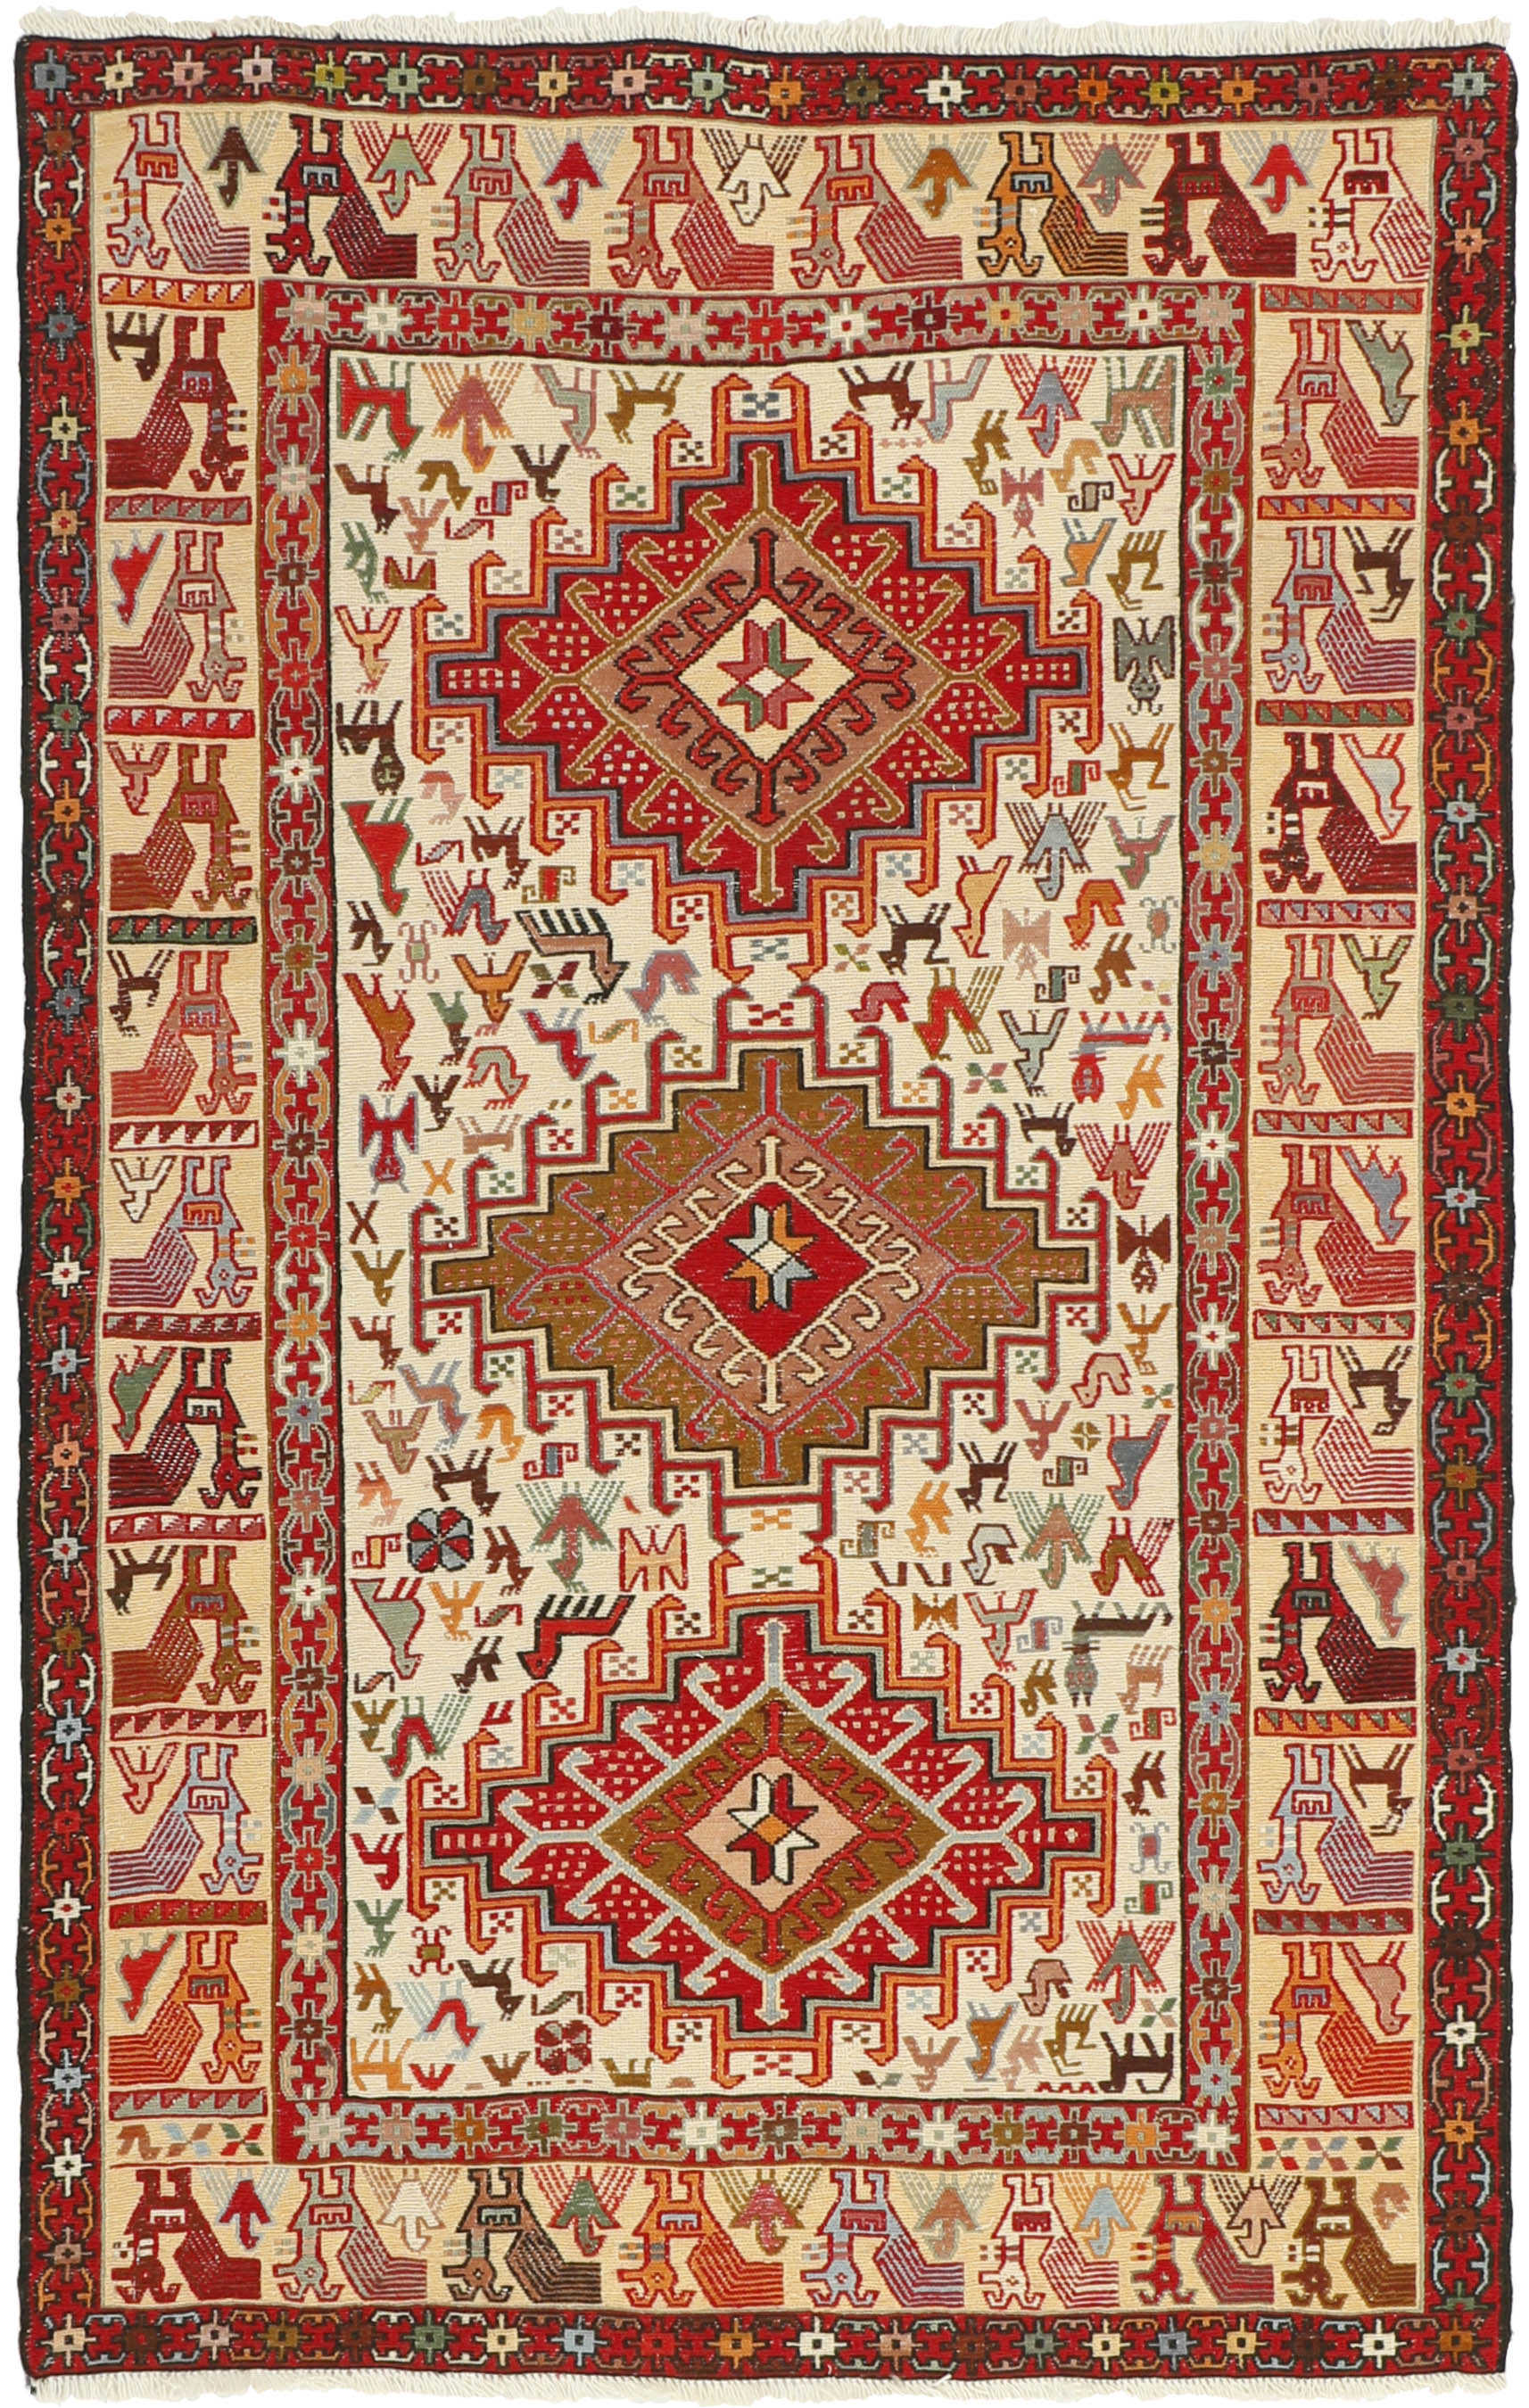 Bordered red Soumak rug with multicolour animal pattern